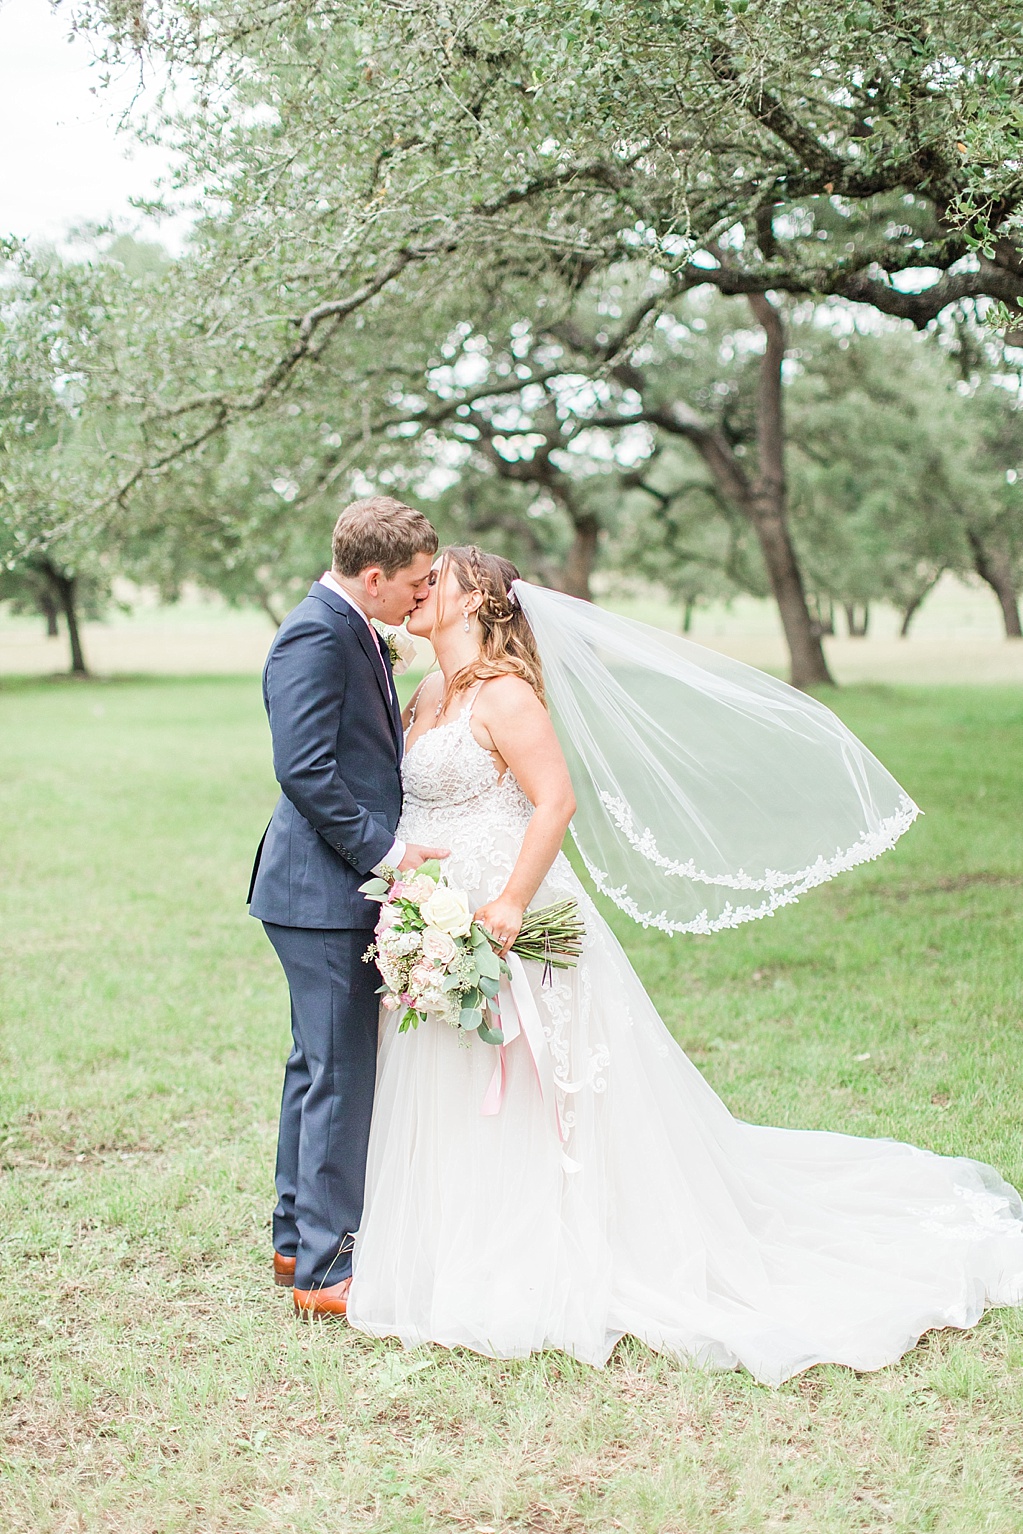 The Oaks at Boerne Wedding Photos by Allison Jeffers Photography 0105